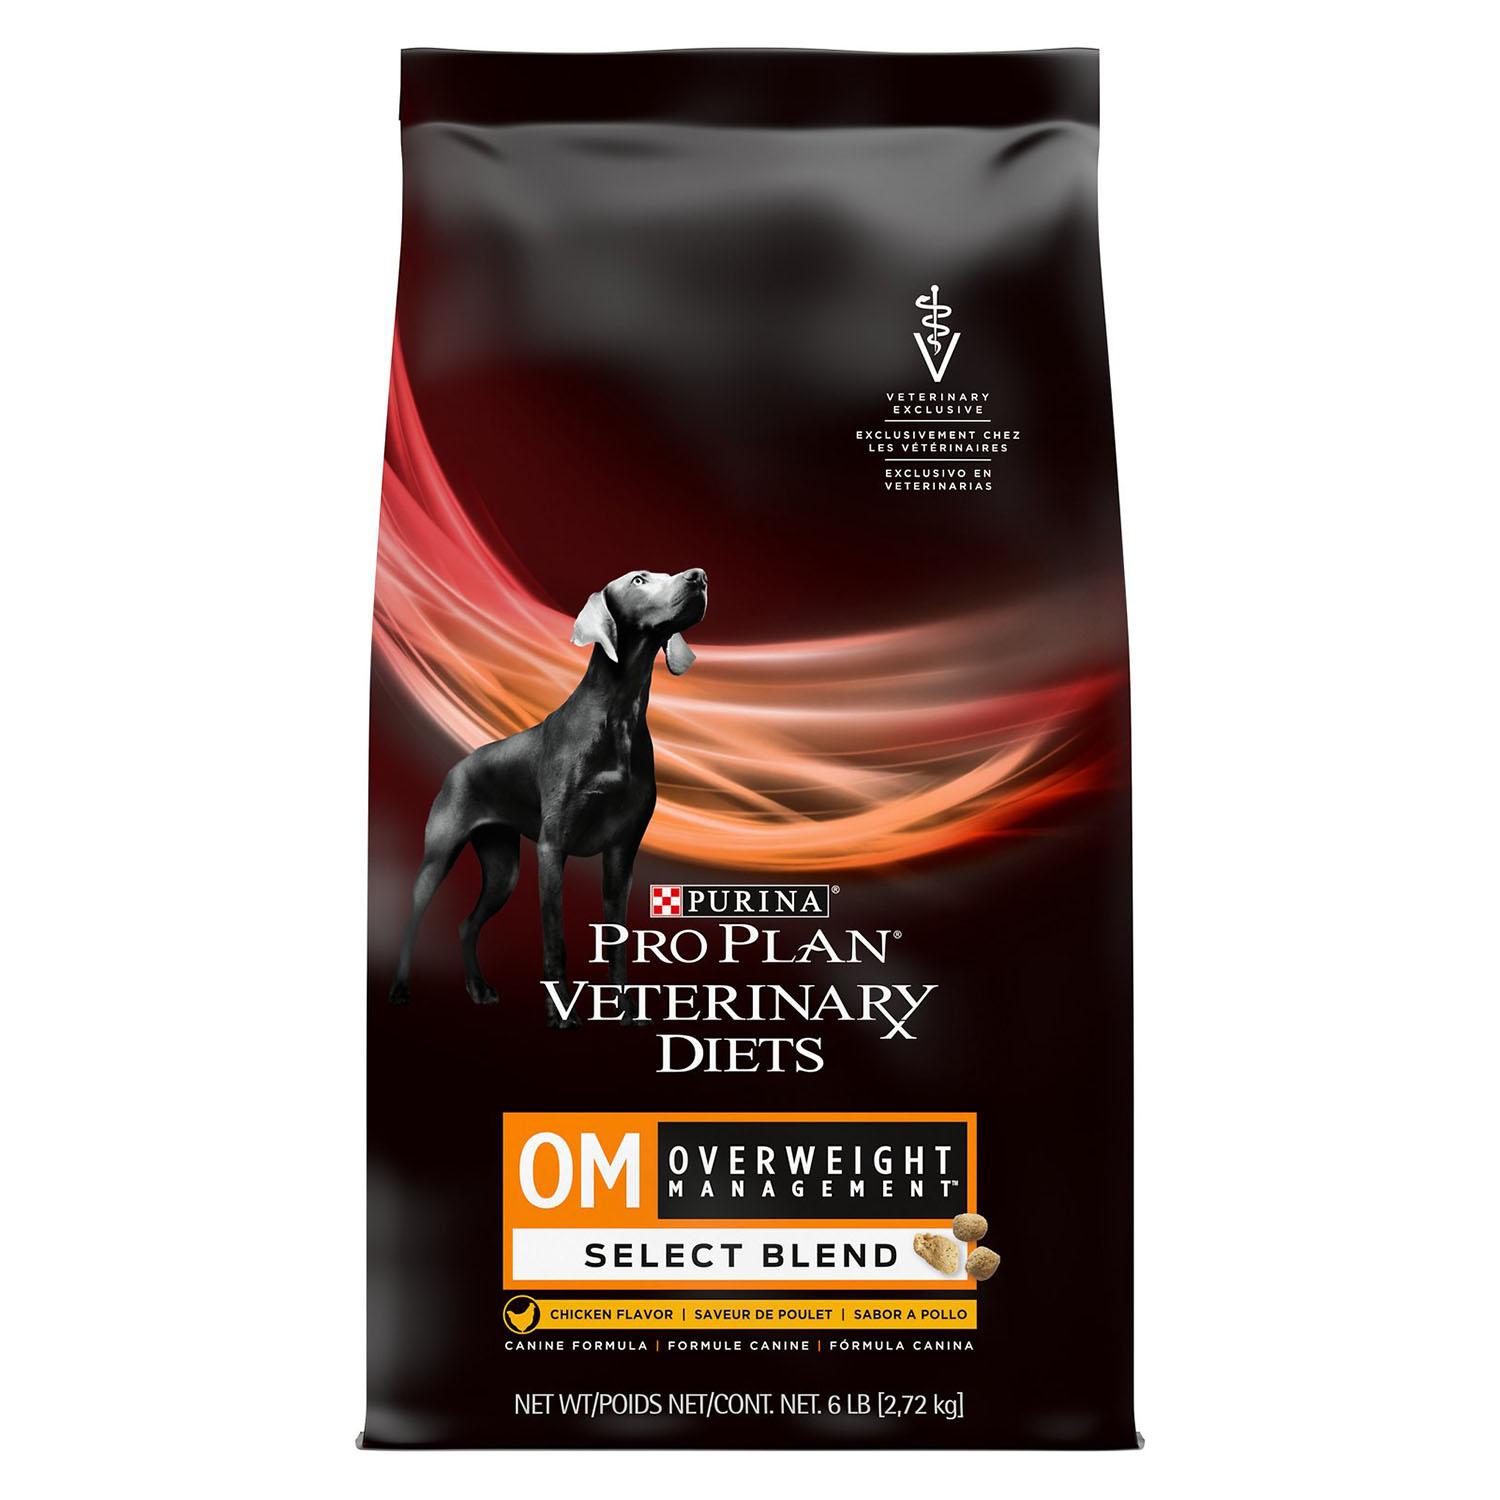 Purina Pro Plan Veterinary Diets OM Select Blend Overweight Management Formula Dry Dog Food